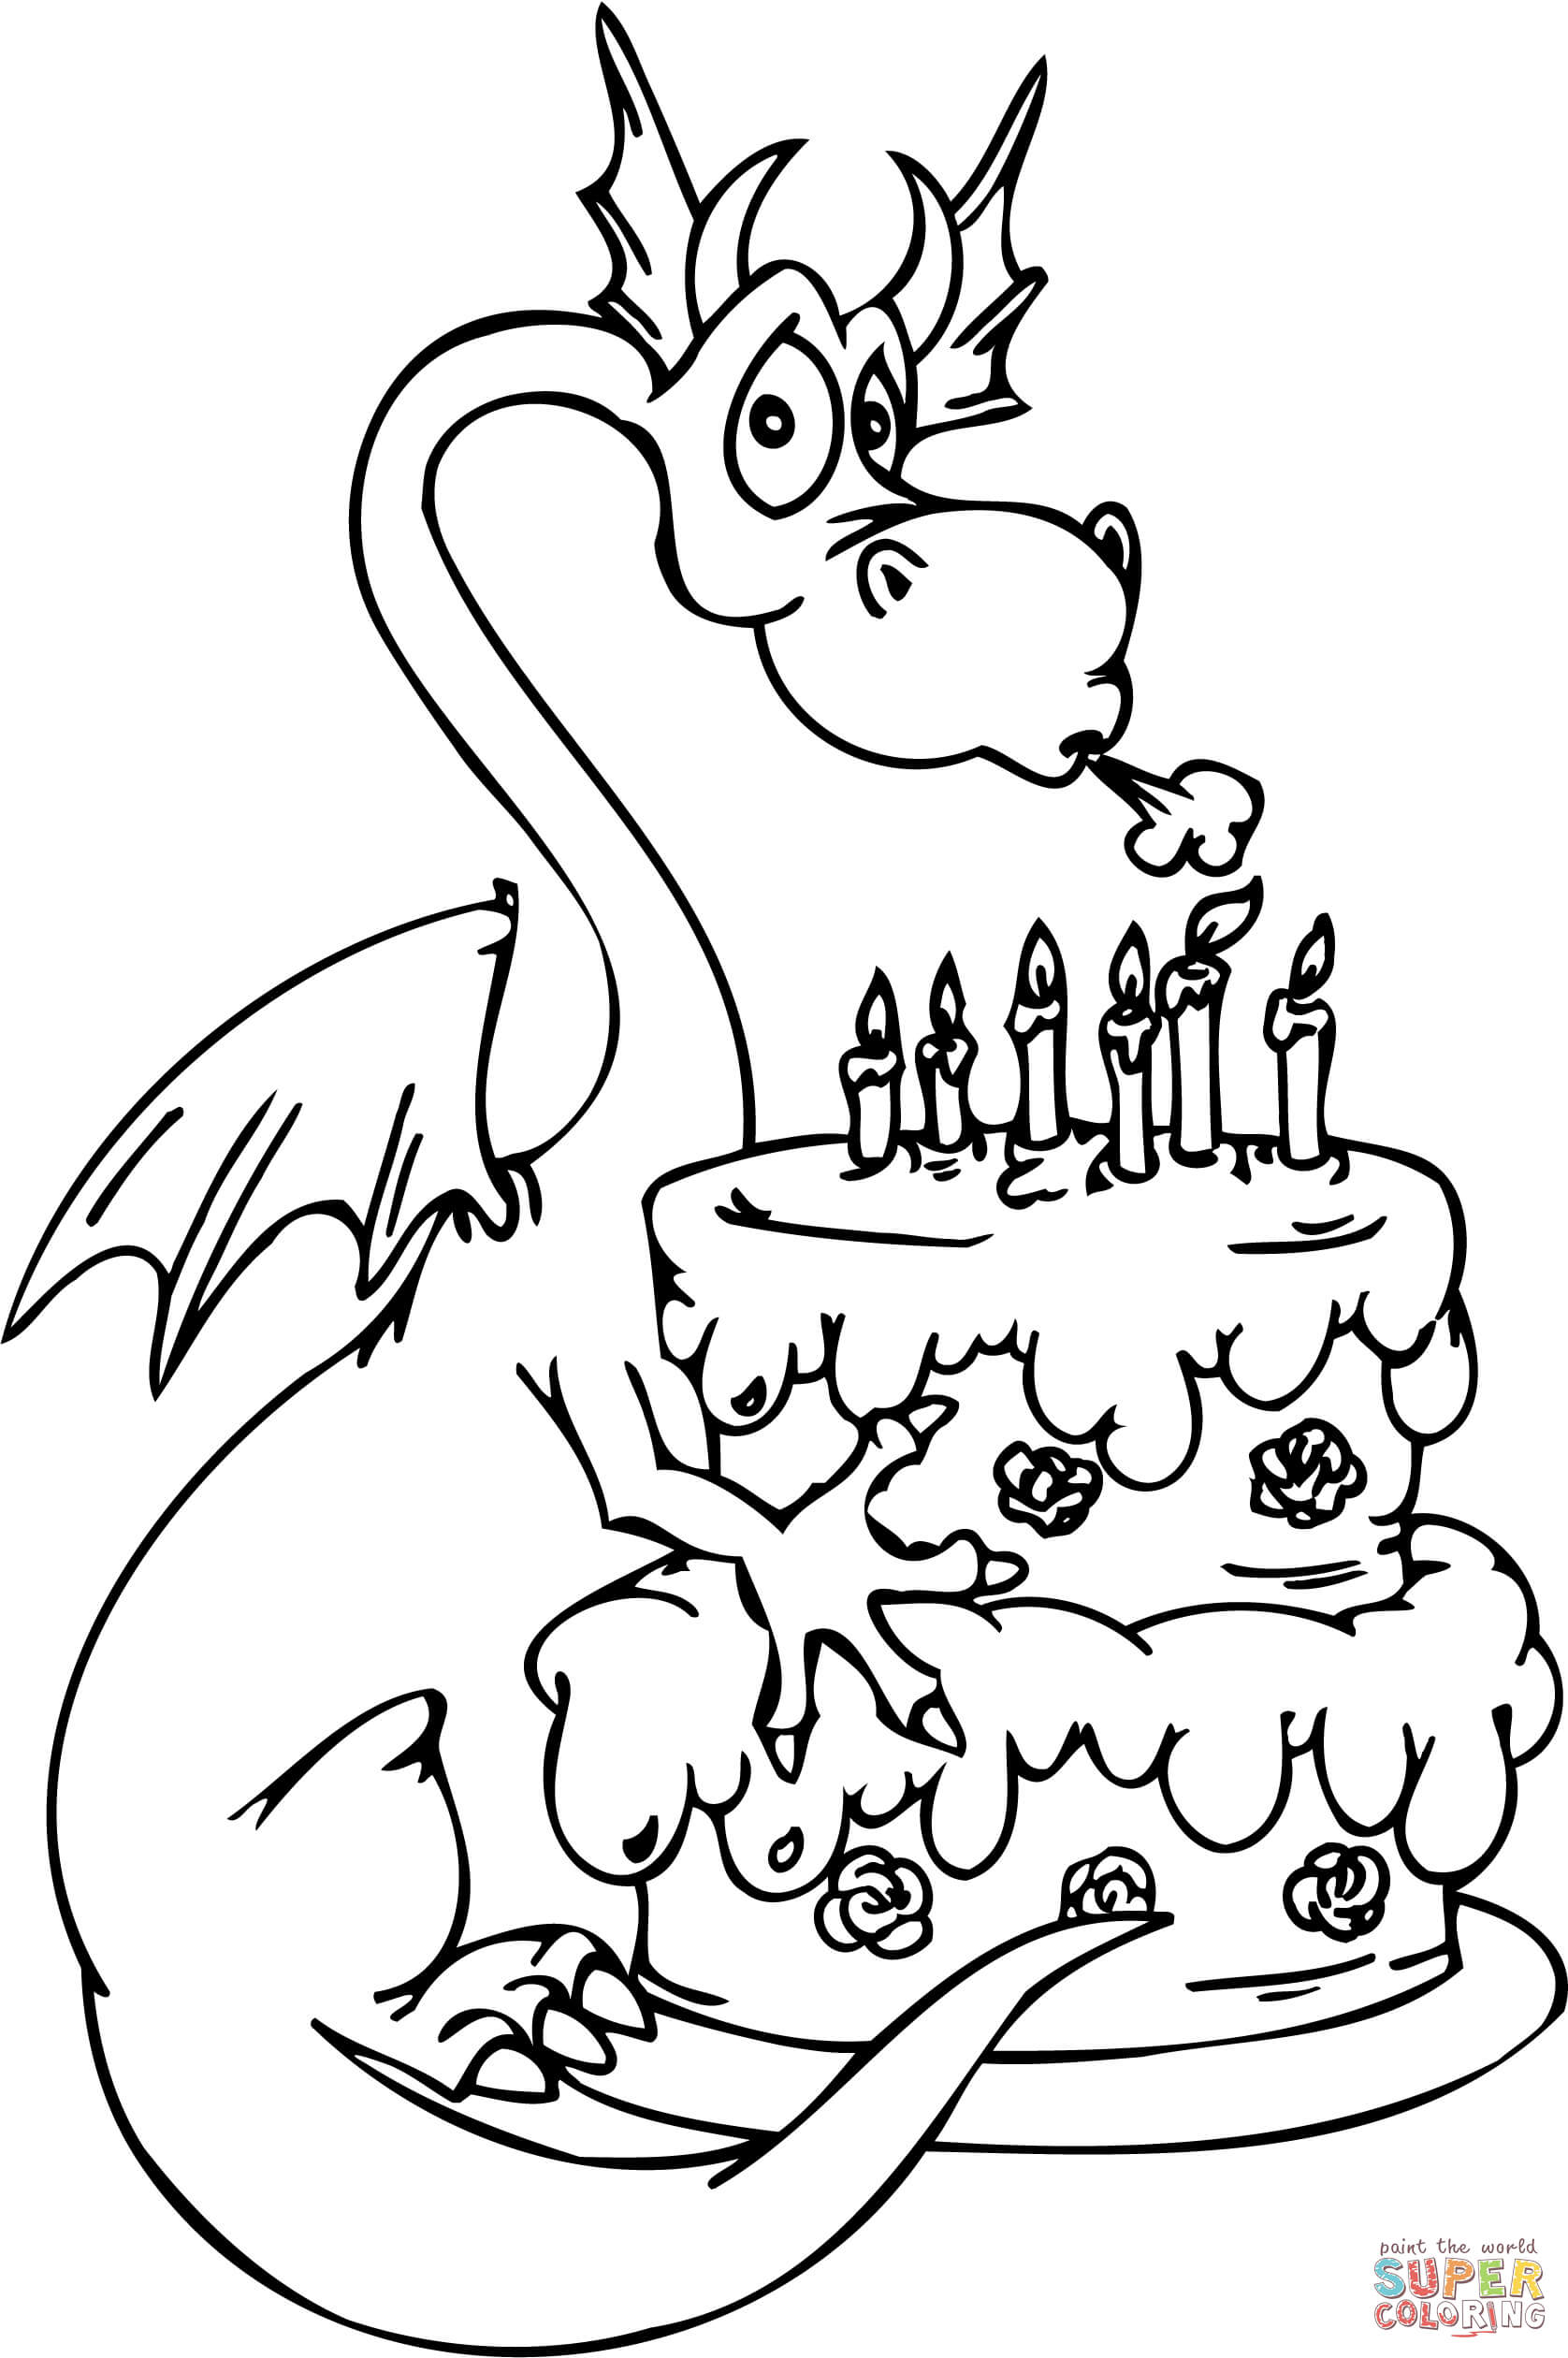 soulmuseumblog-coloring-pages-birthday